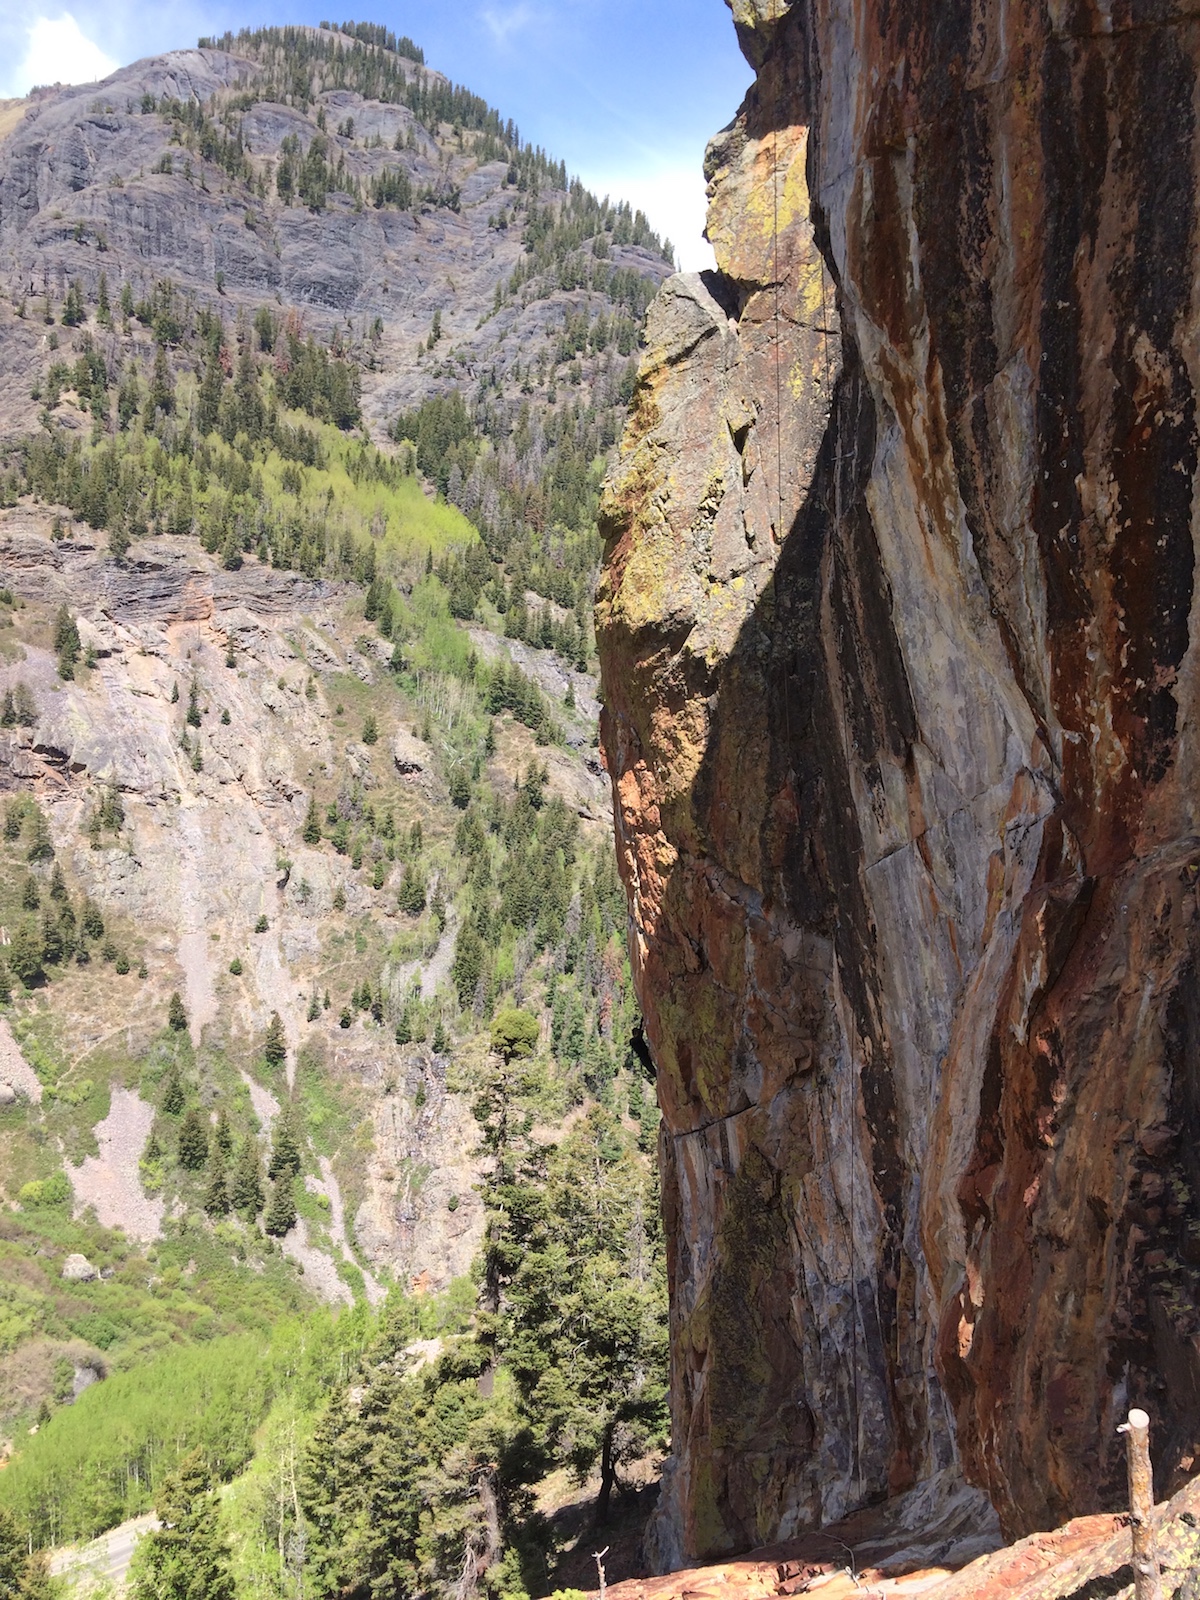 The Foehn Brise Pants were ideal for the chilly spring temps at the Techno Crag (ca. 9,000') above Ouray, Colorado, last May. Here the author enjoys the classic arete of All Night Rave (5.12b) with numb fingers. [Photo] Mandi Franz